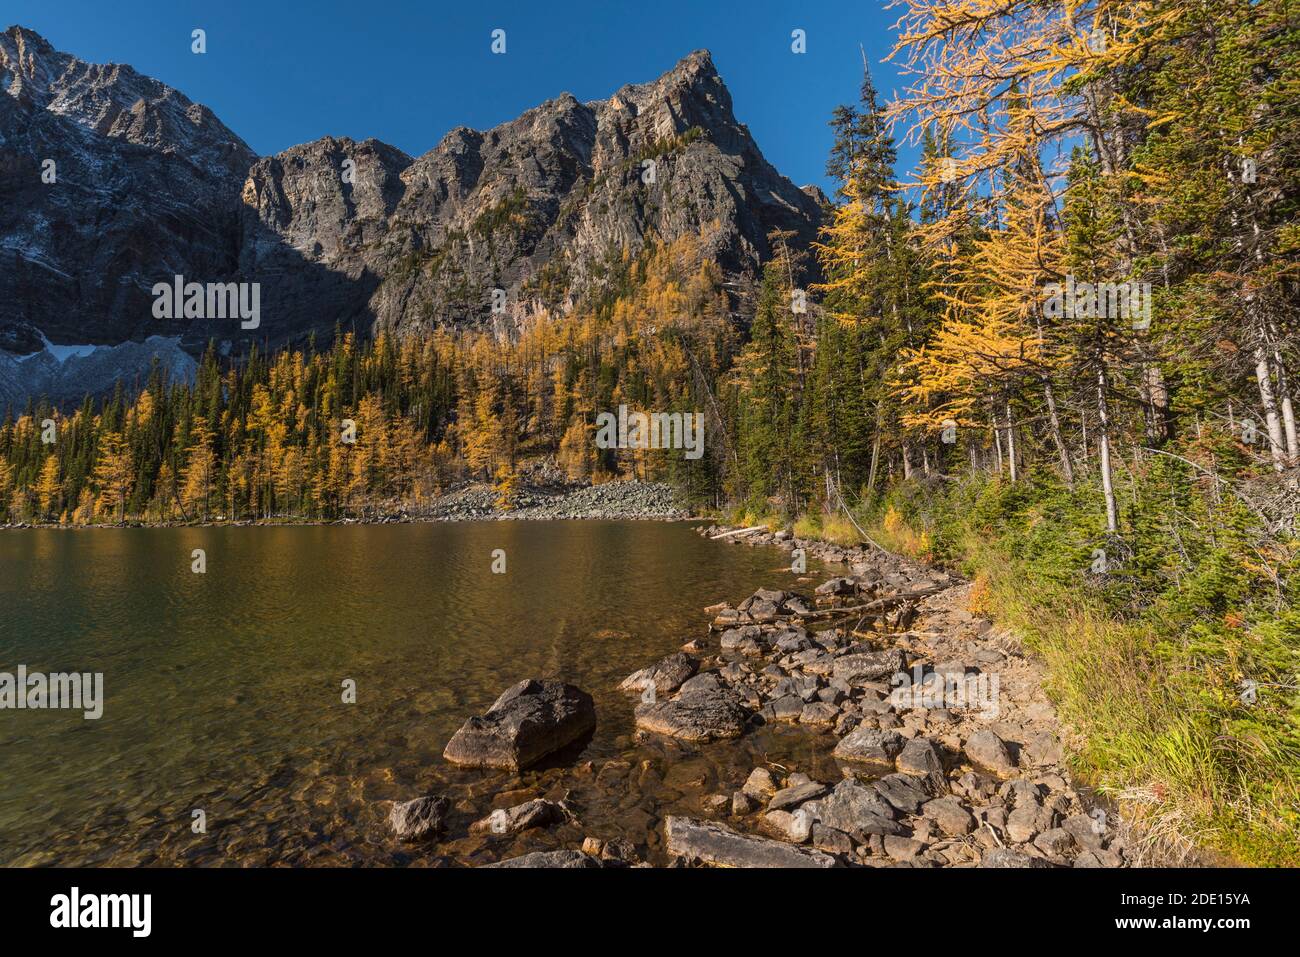 Arnica Lake in autumn with Larch trees and Mountains, Banff National Park, UNESCO, Alberta, Canadian Rockies, Canada, North America Stock Photo